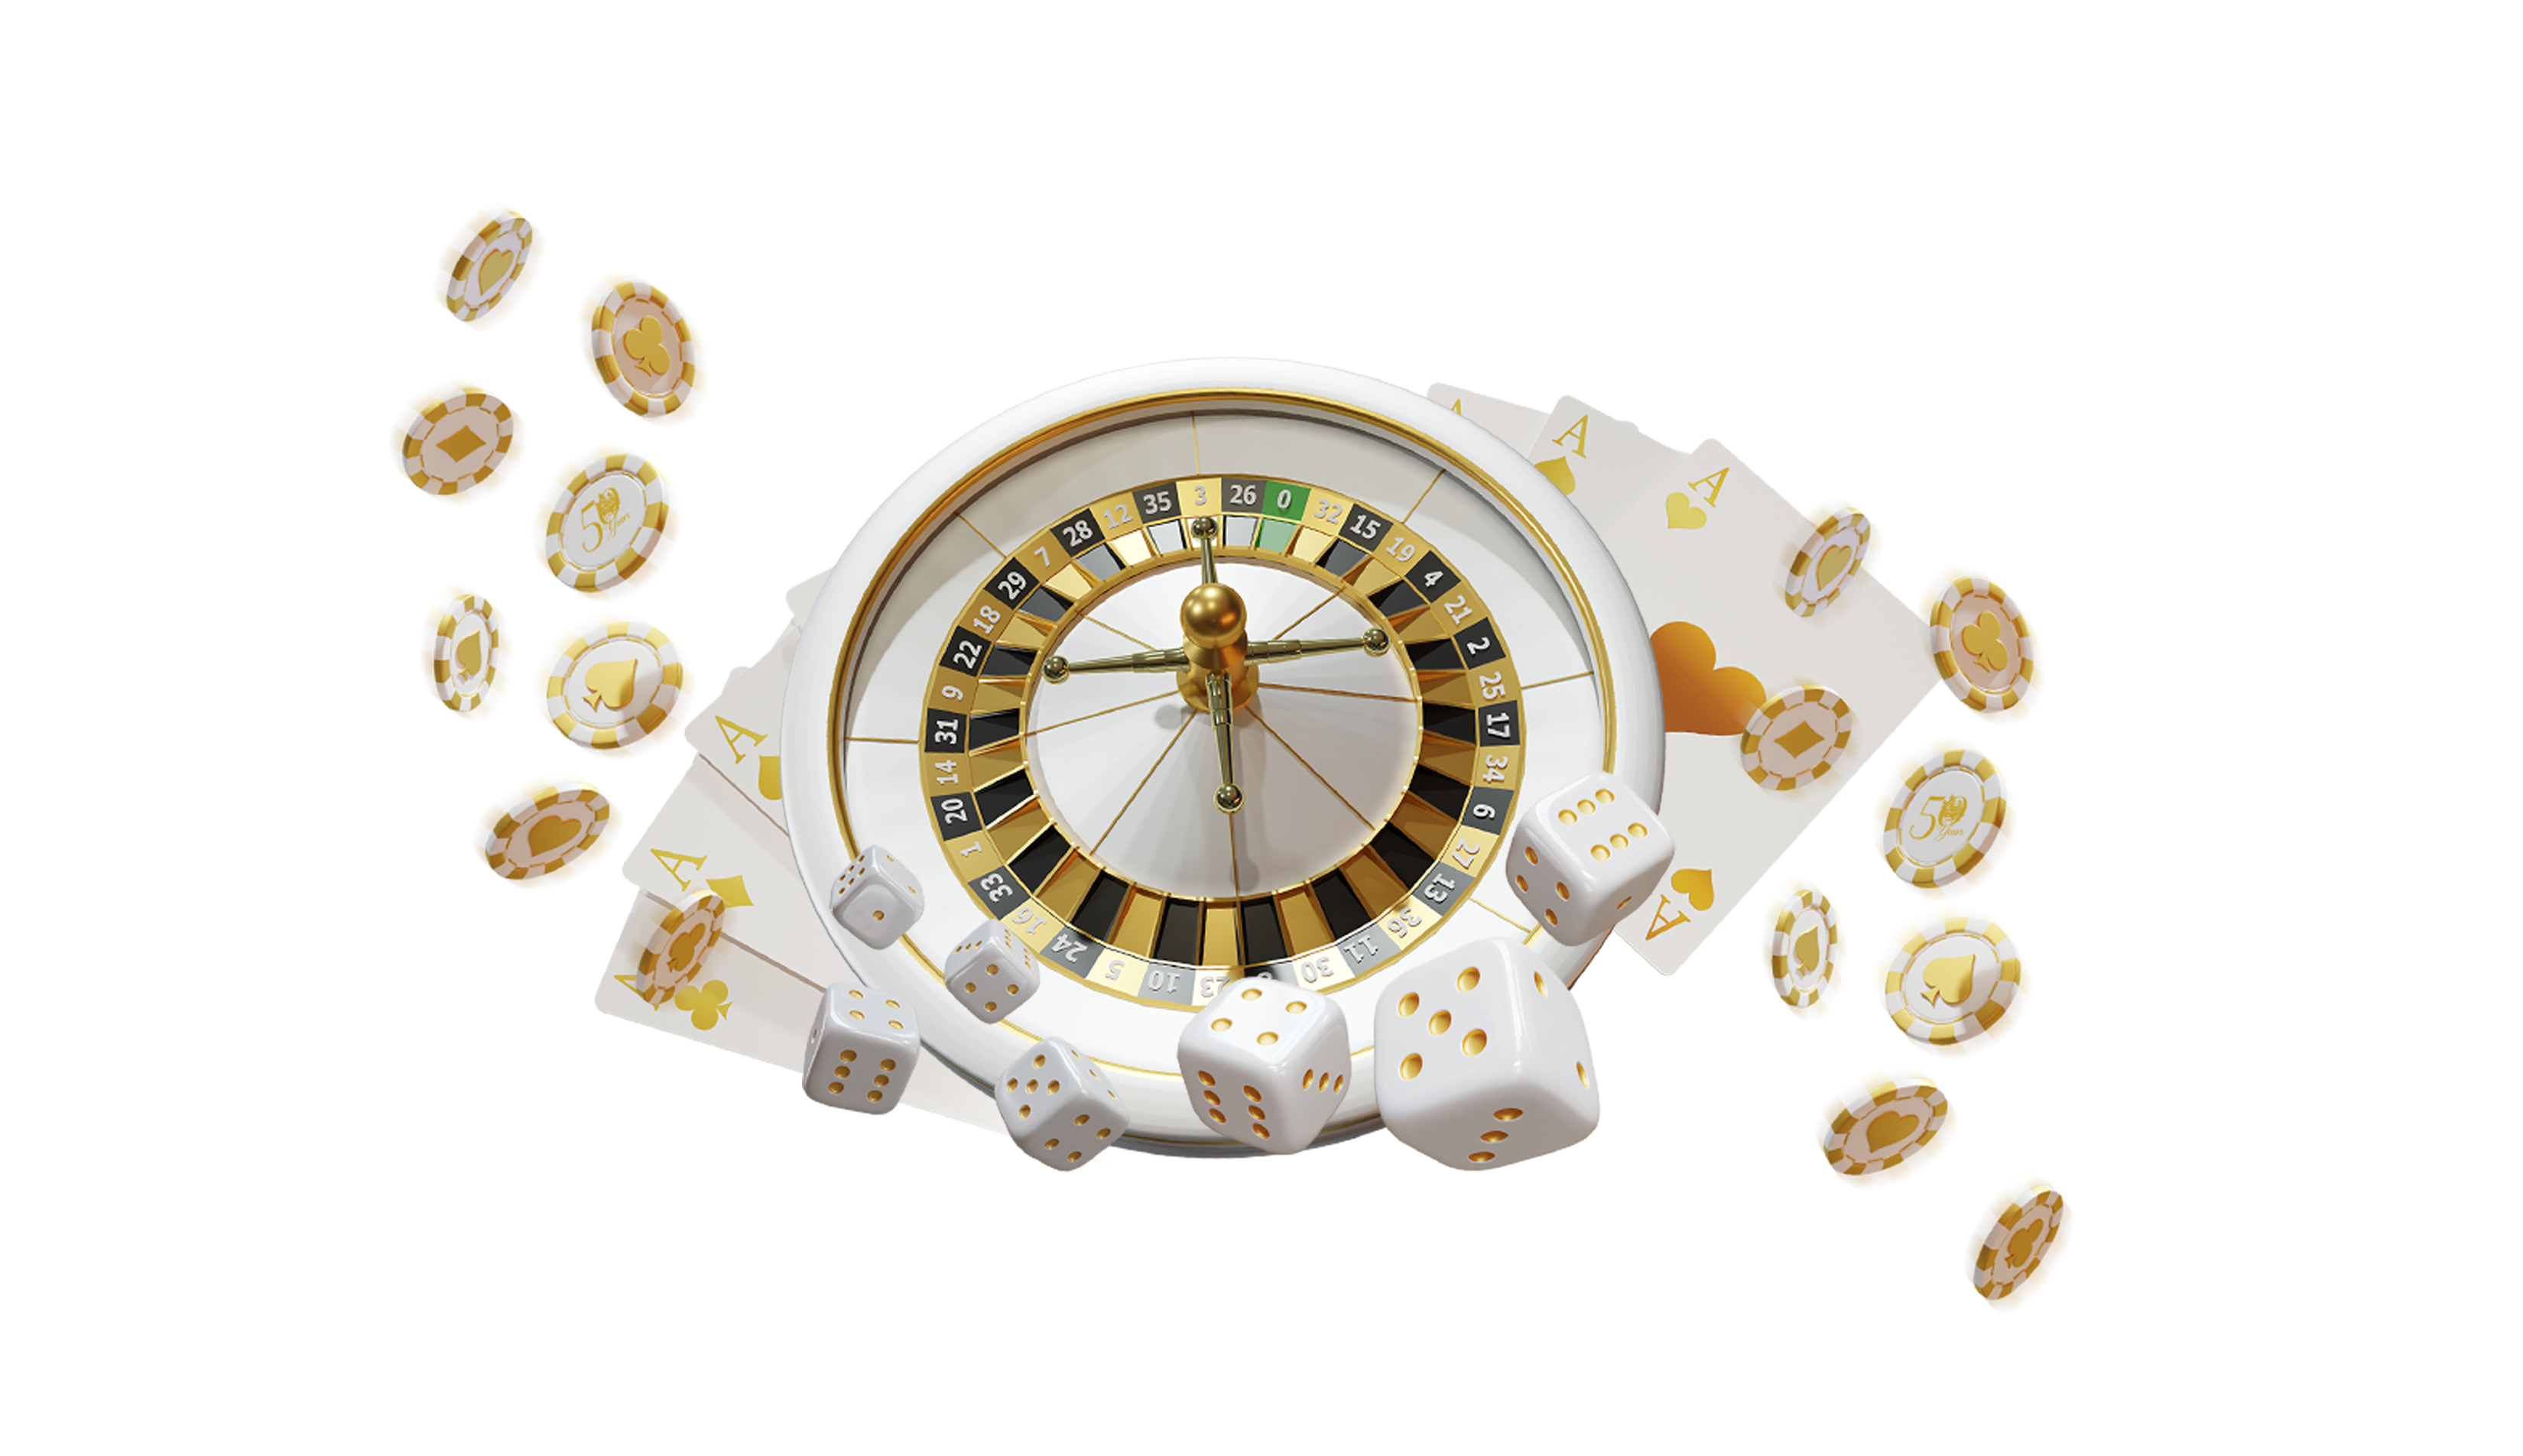 a design featuring a roulette wheel, playing cards, poker chips, dice and the words Casino Night